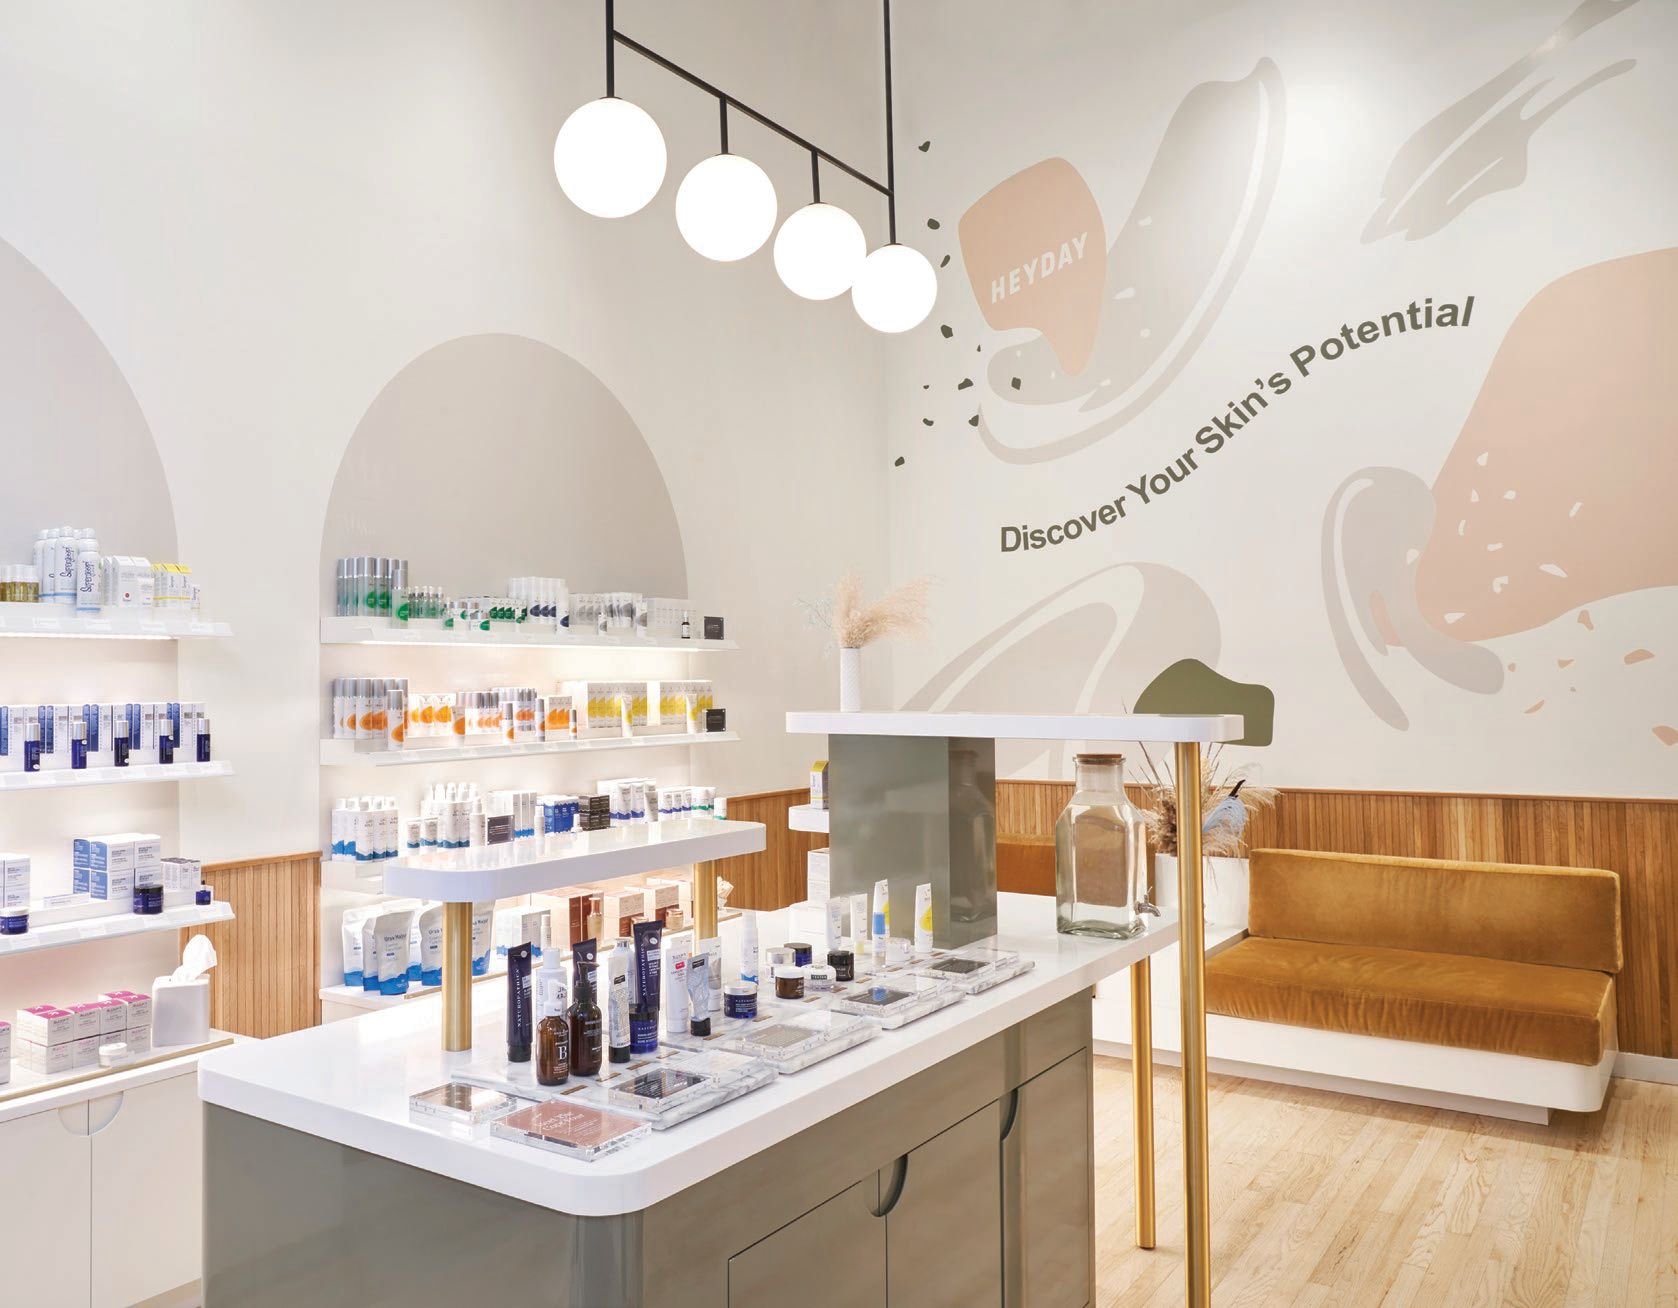 Heyday’s skincare and retail section PHOTO COURTESY OF HEYDAY